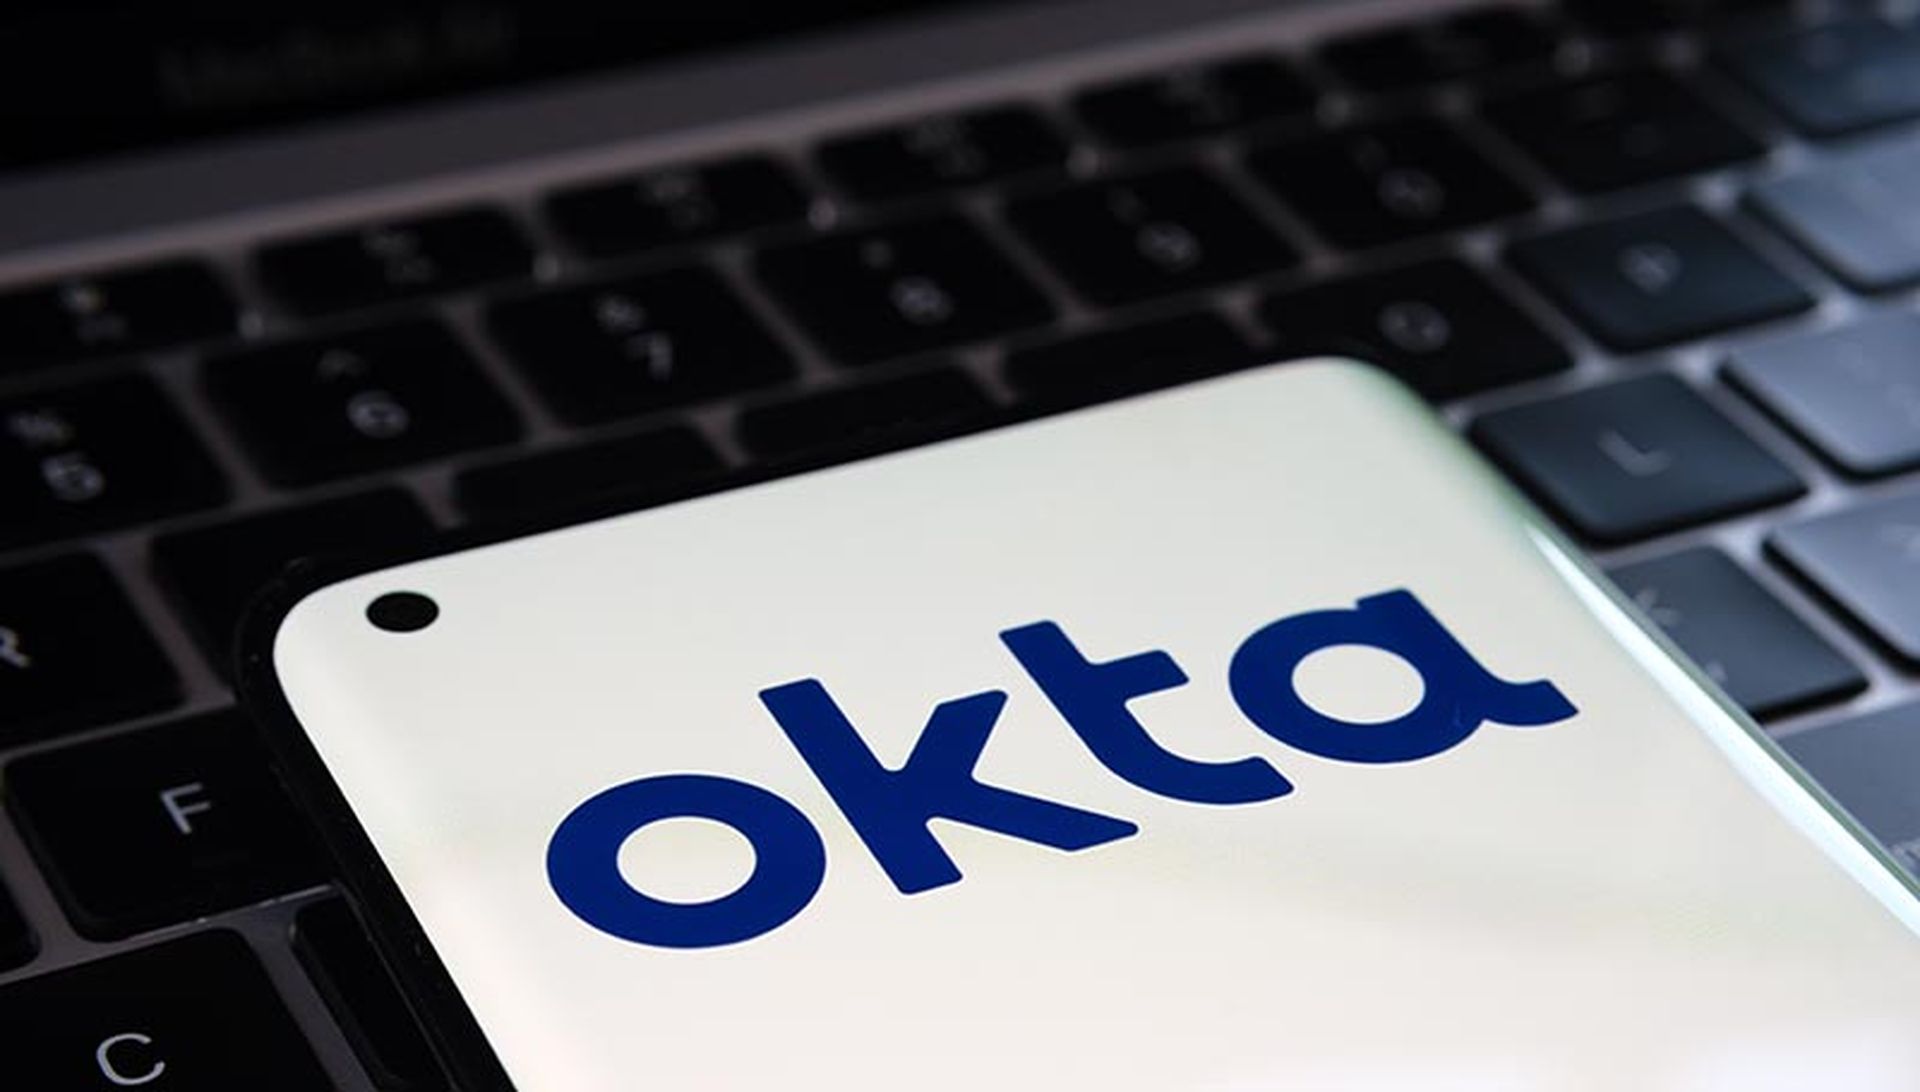 Attackers leverage stolen credential to access Okta’s support case management system